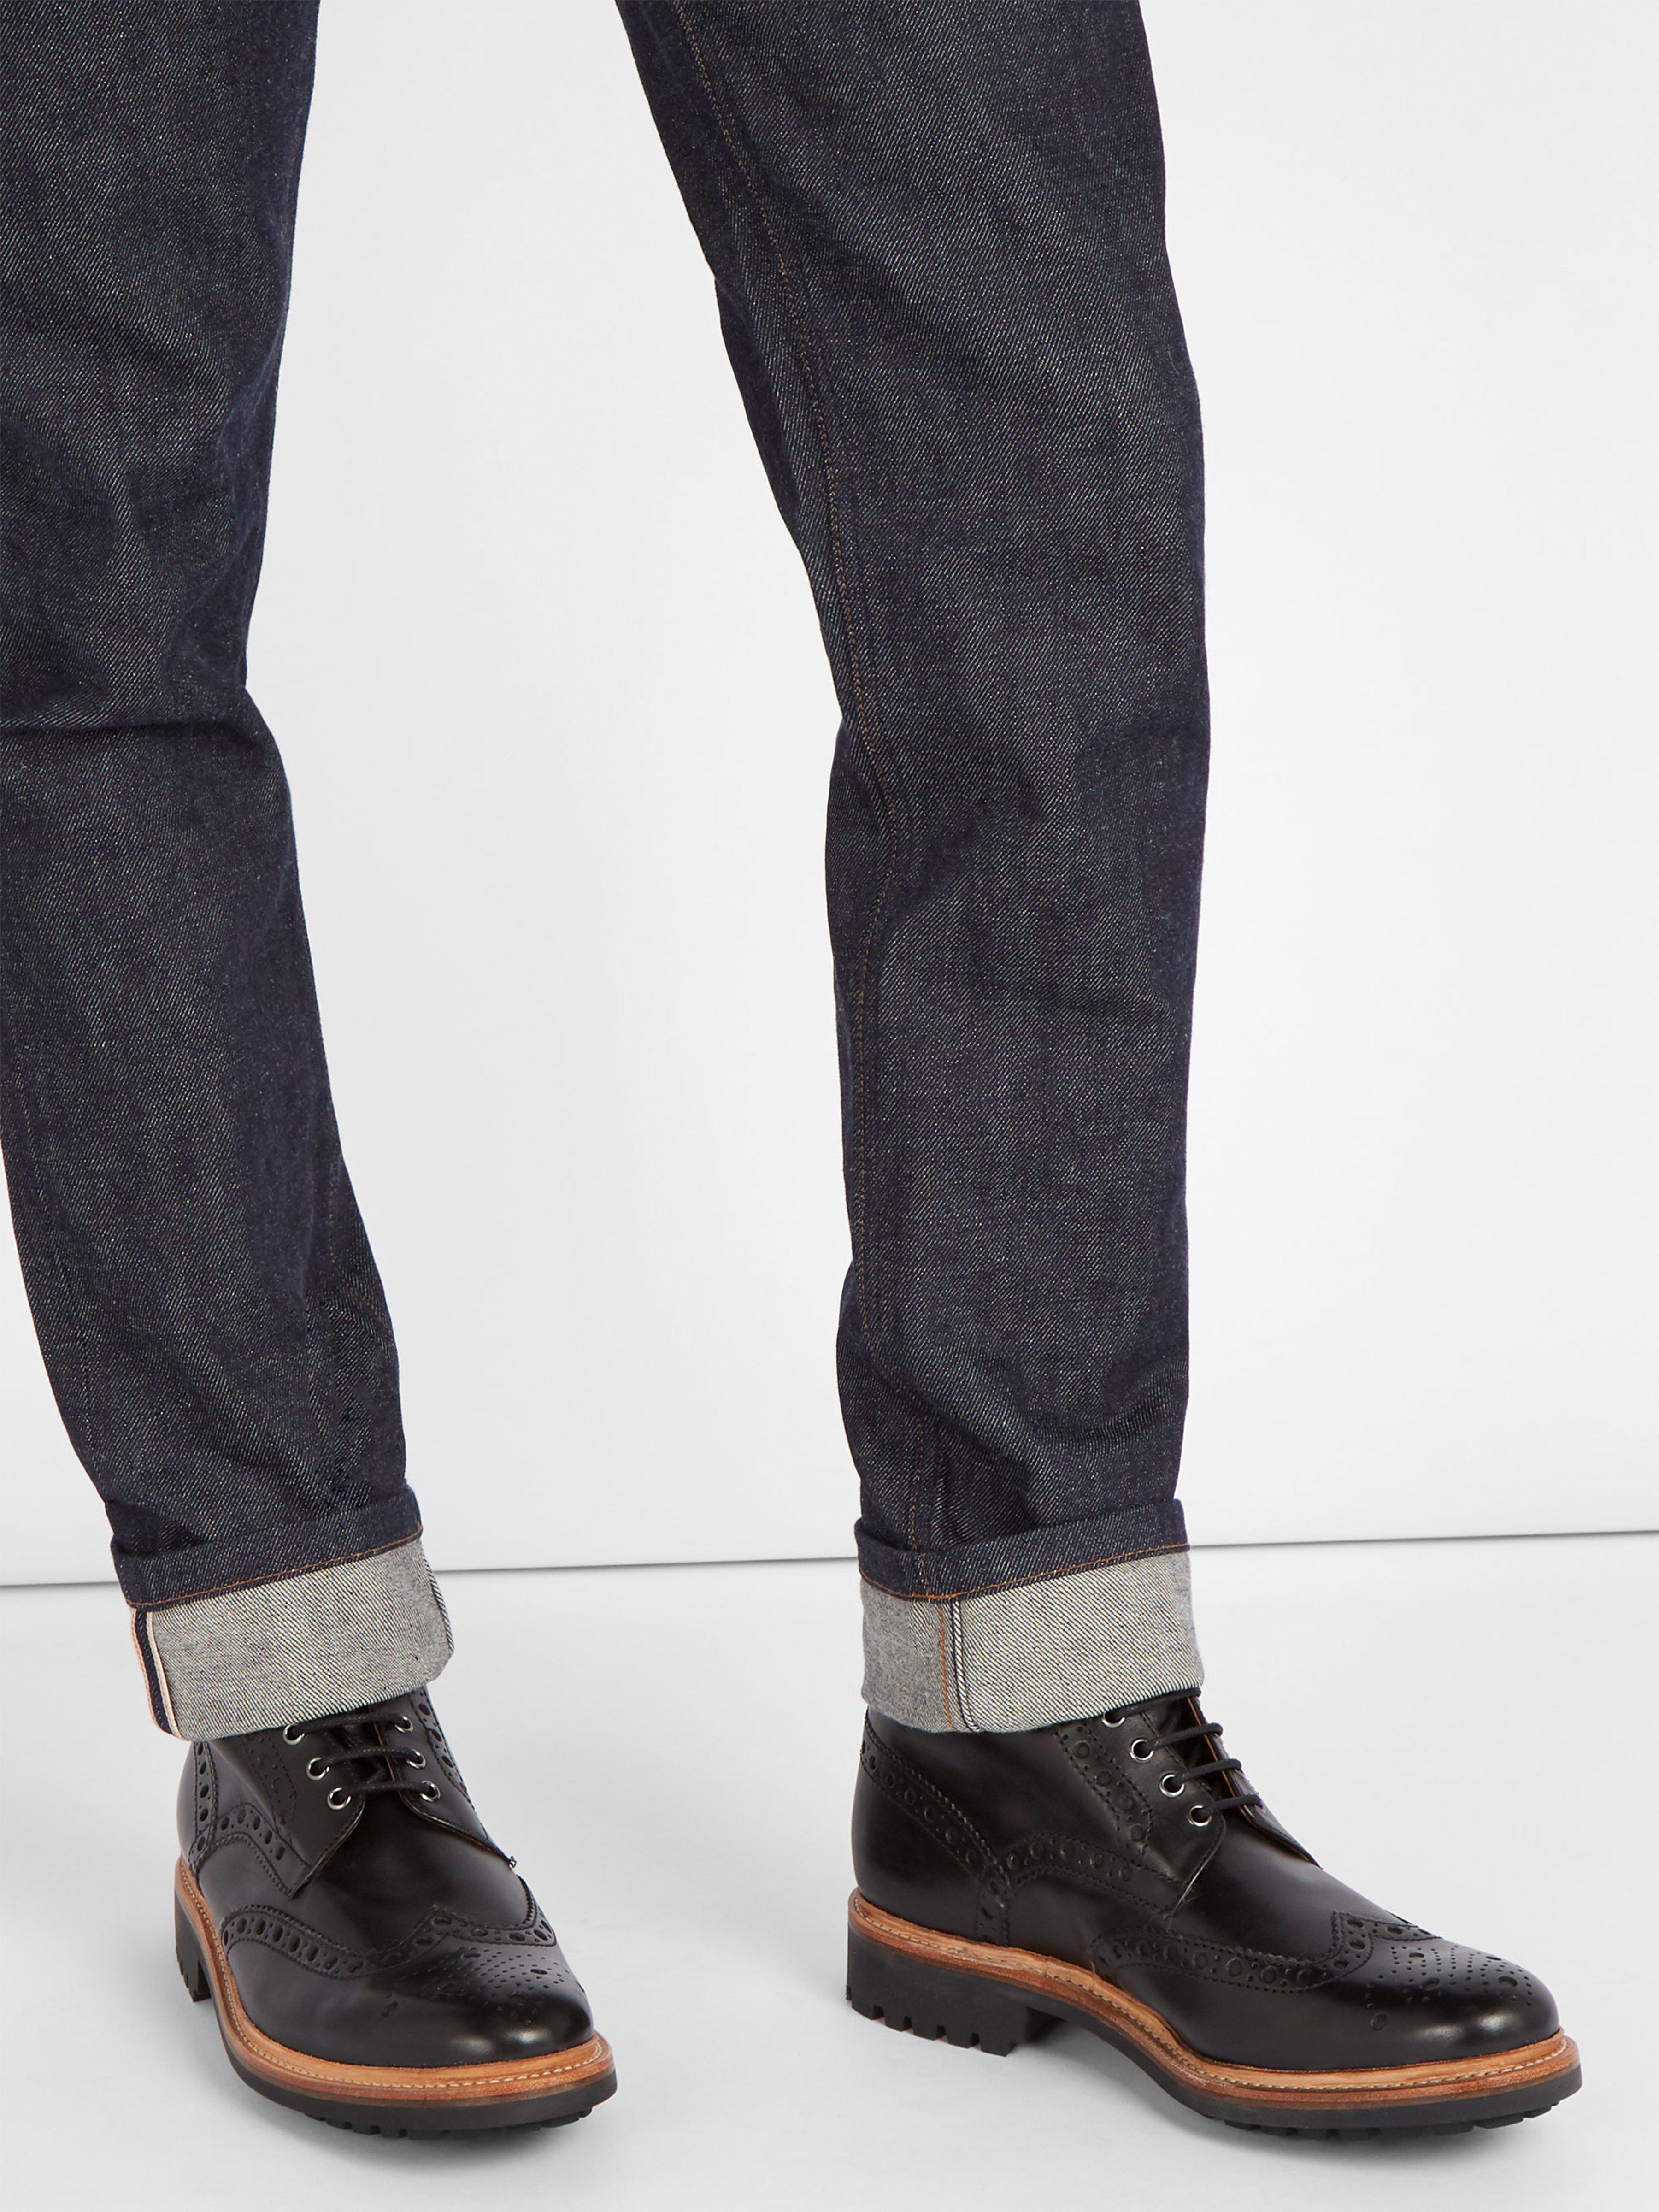 grenson fred boots black